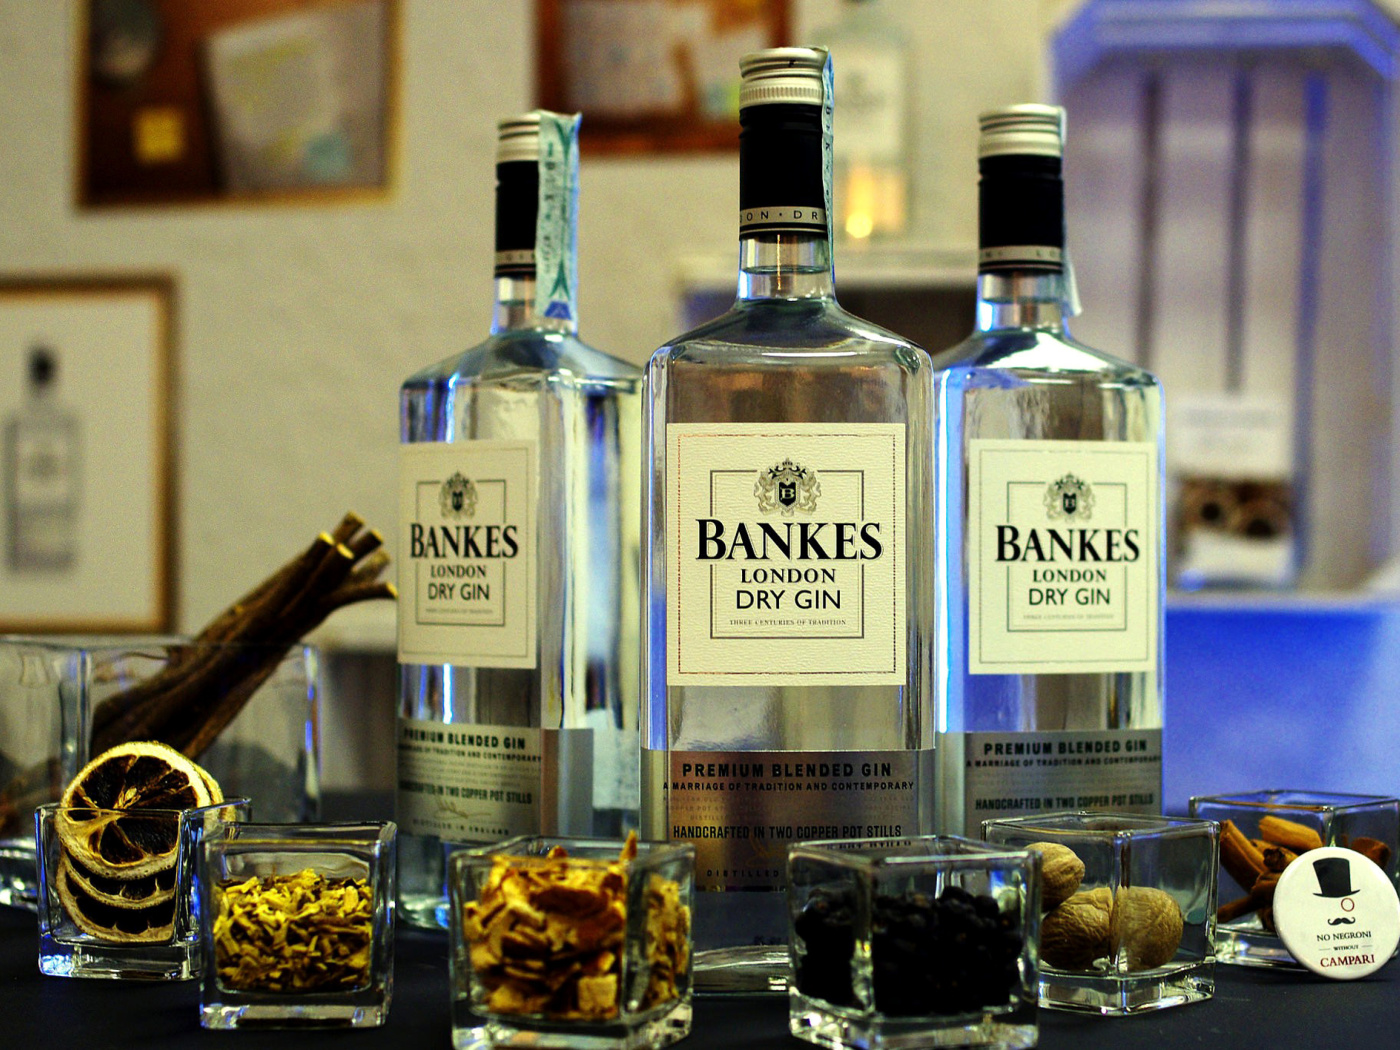 Dry Gin Bankers wallpaper 1400x1050